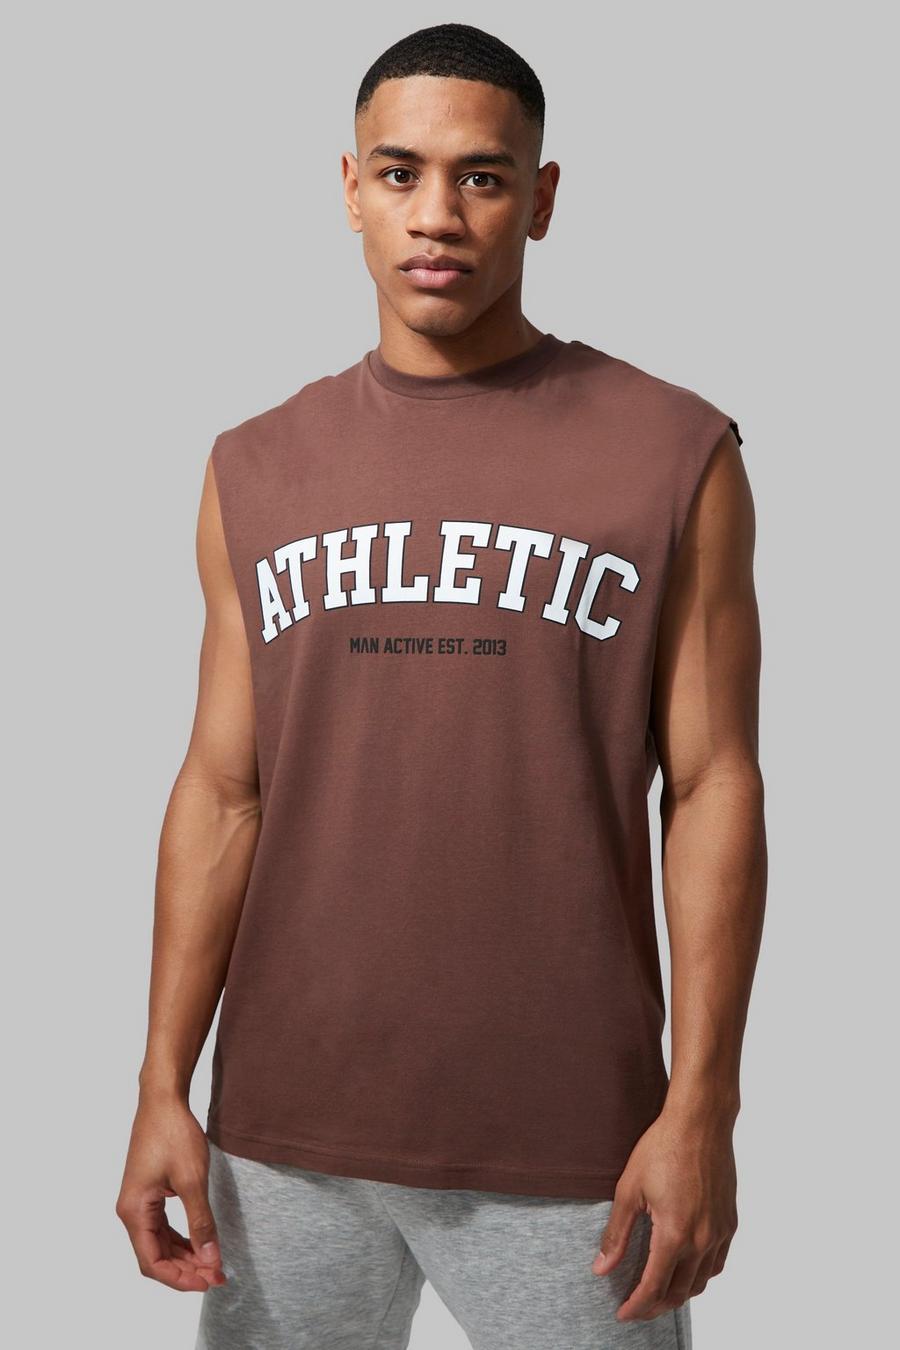 Chocolate brown Man Active Gym Athletic Tank